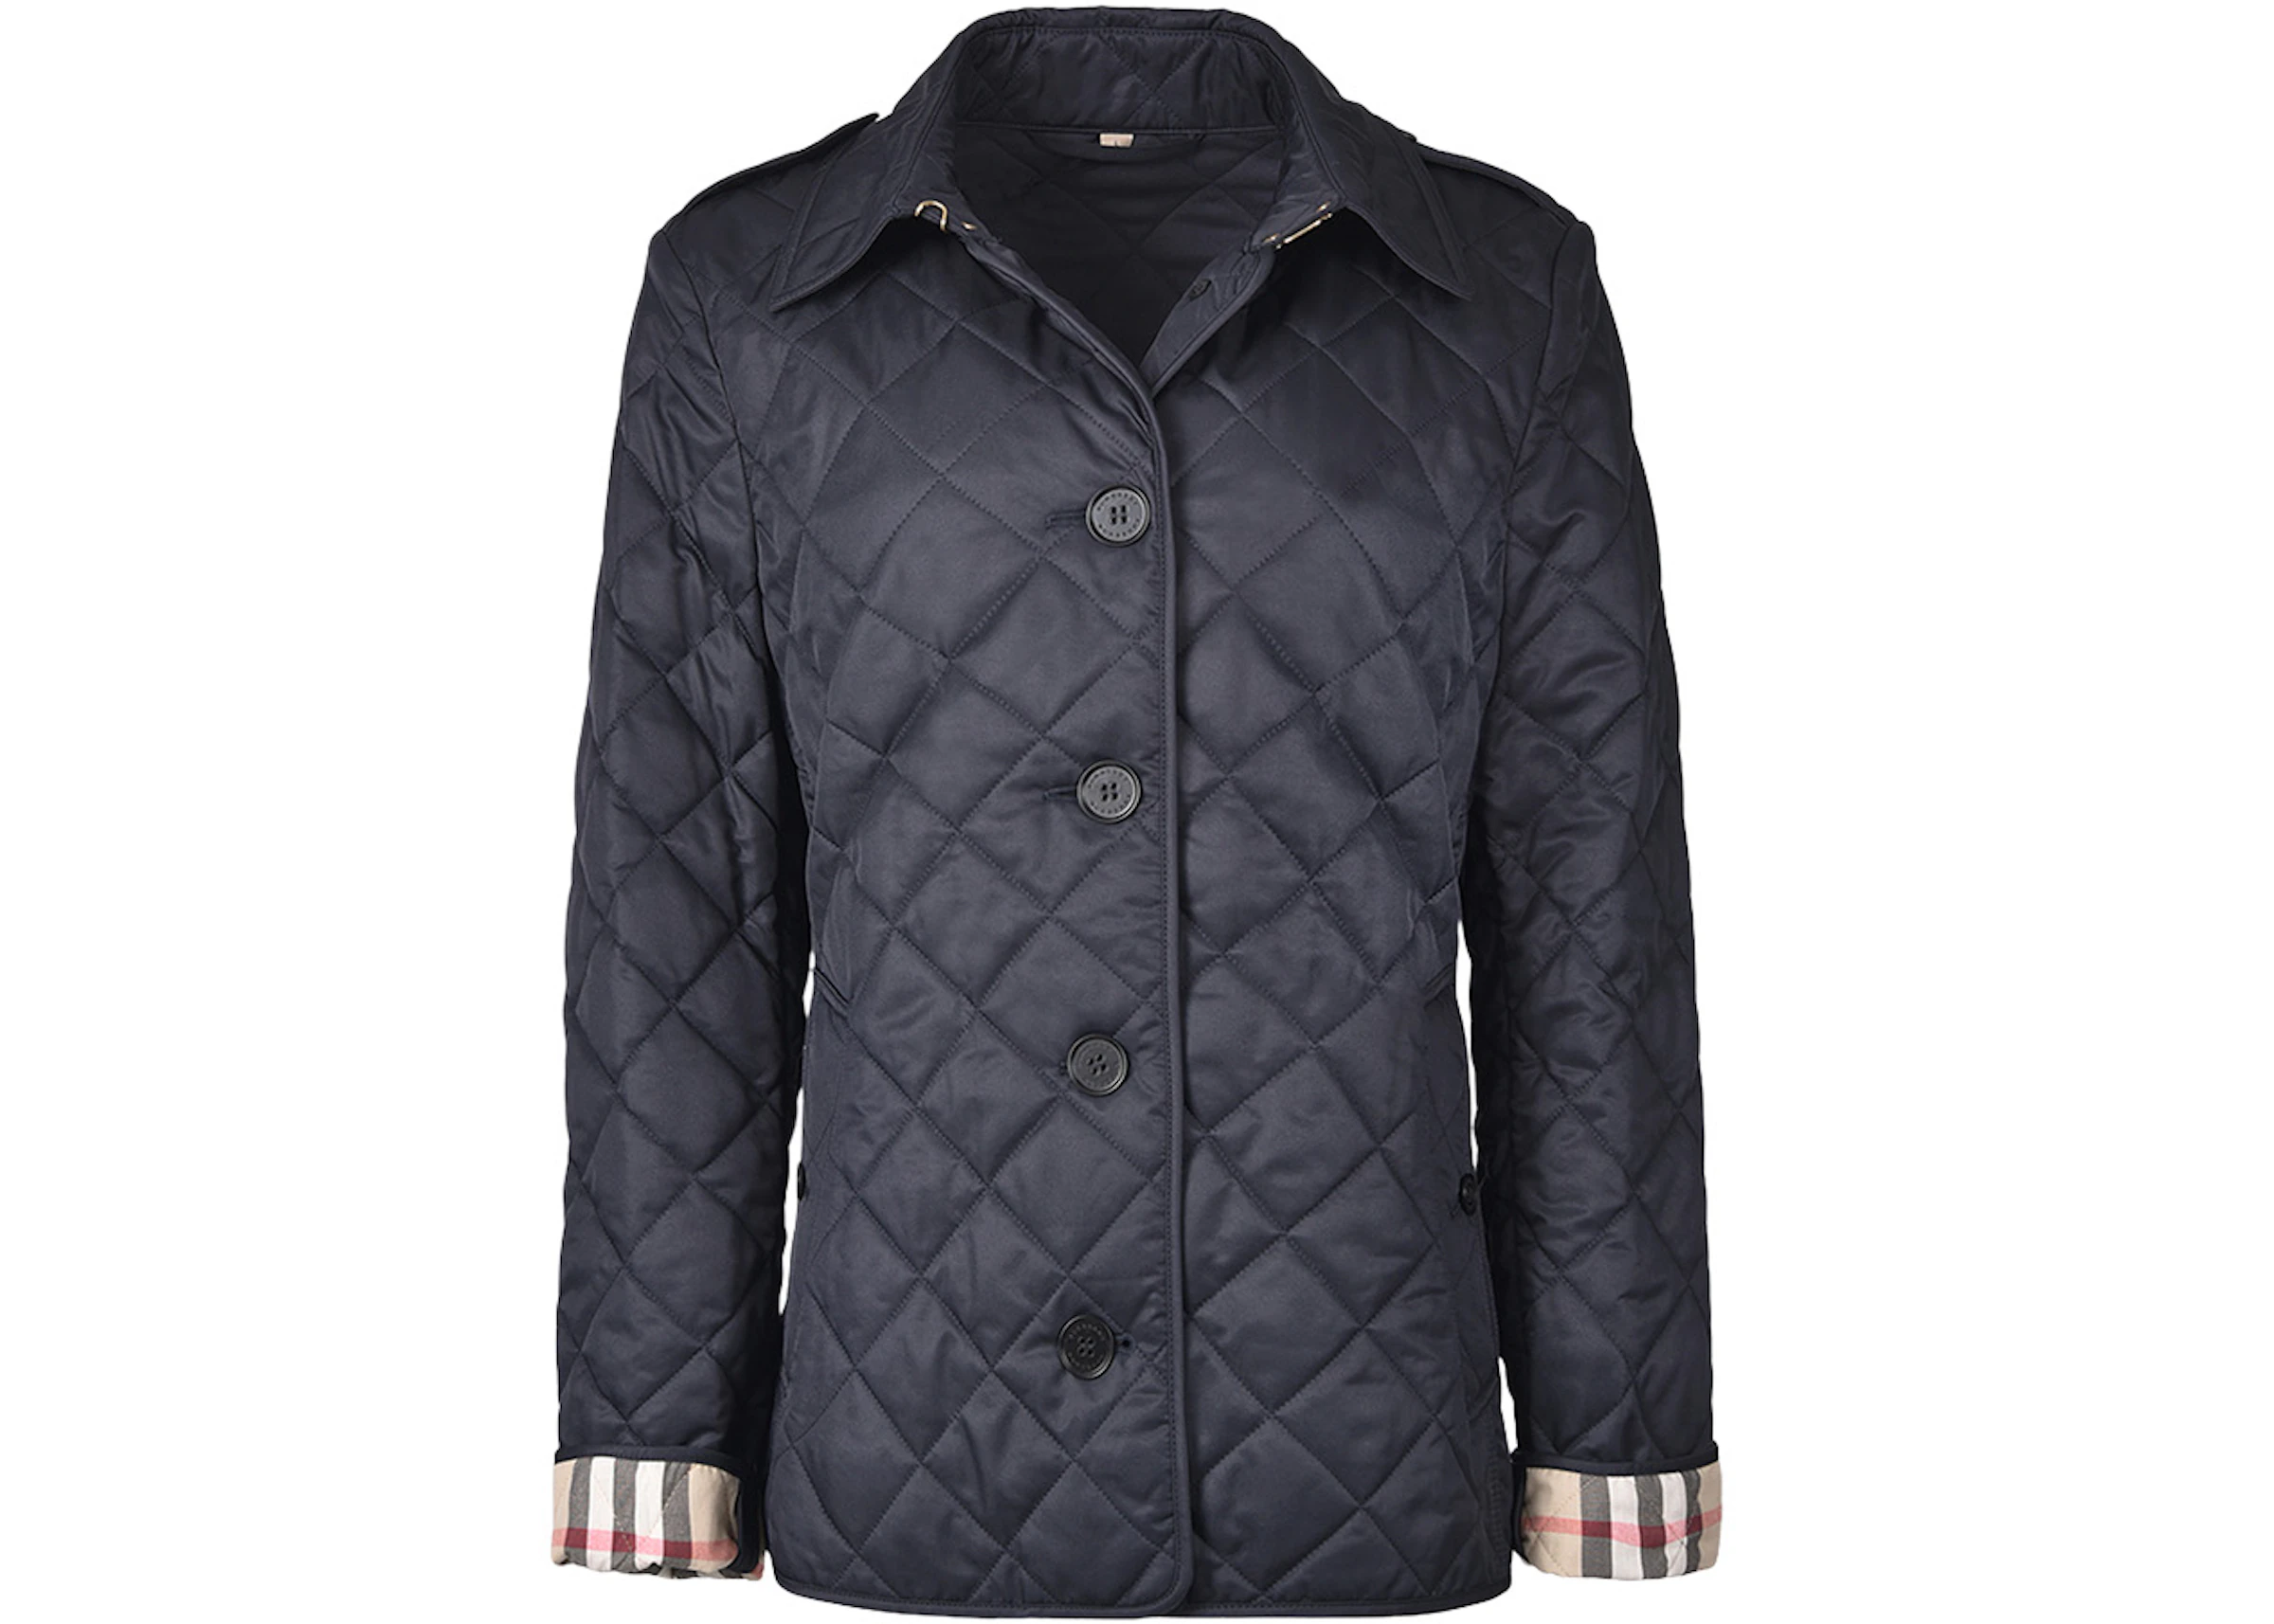 Burberry Diamond Quilted Jacket Navy - US